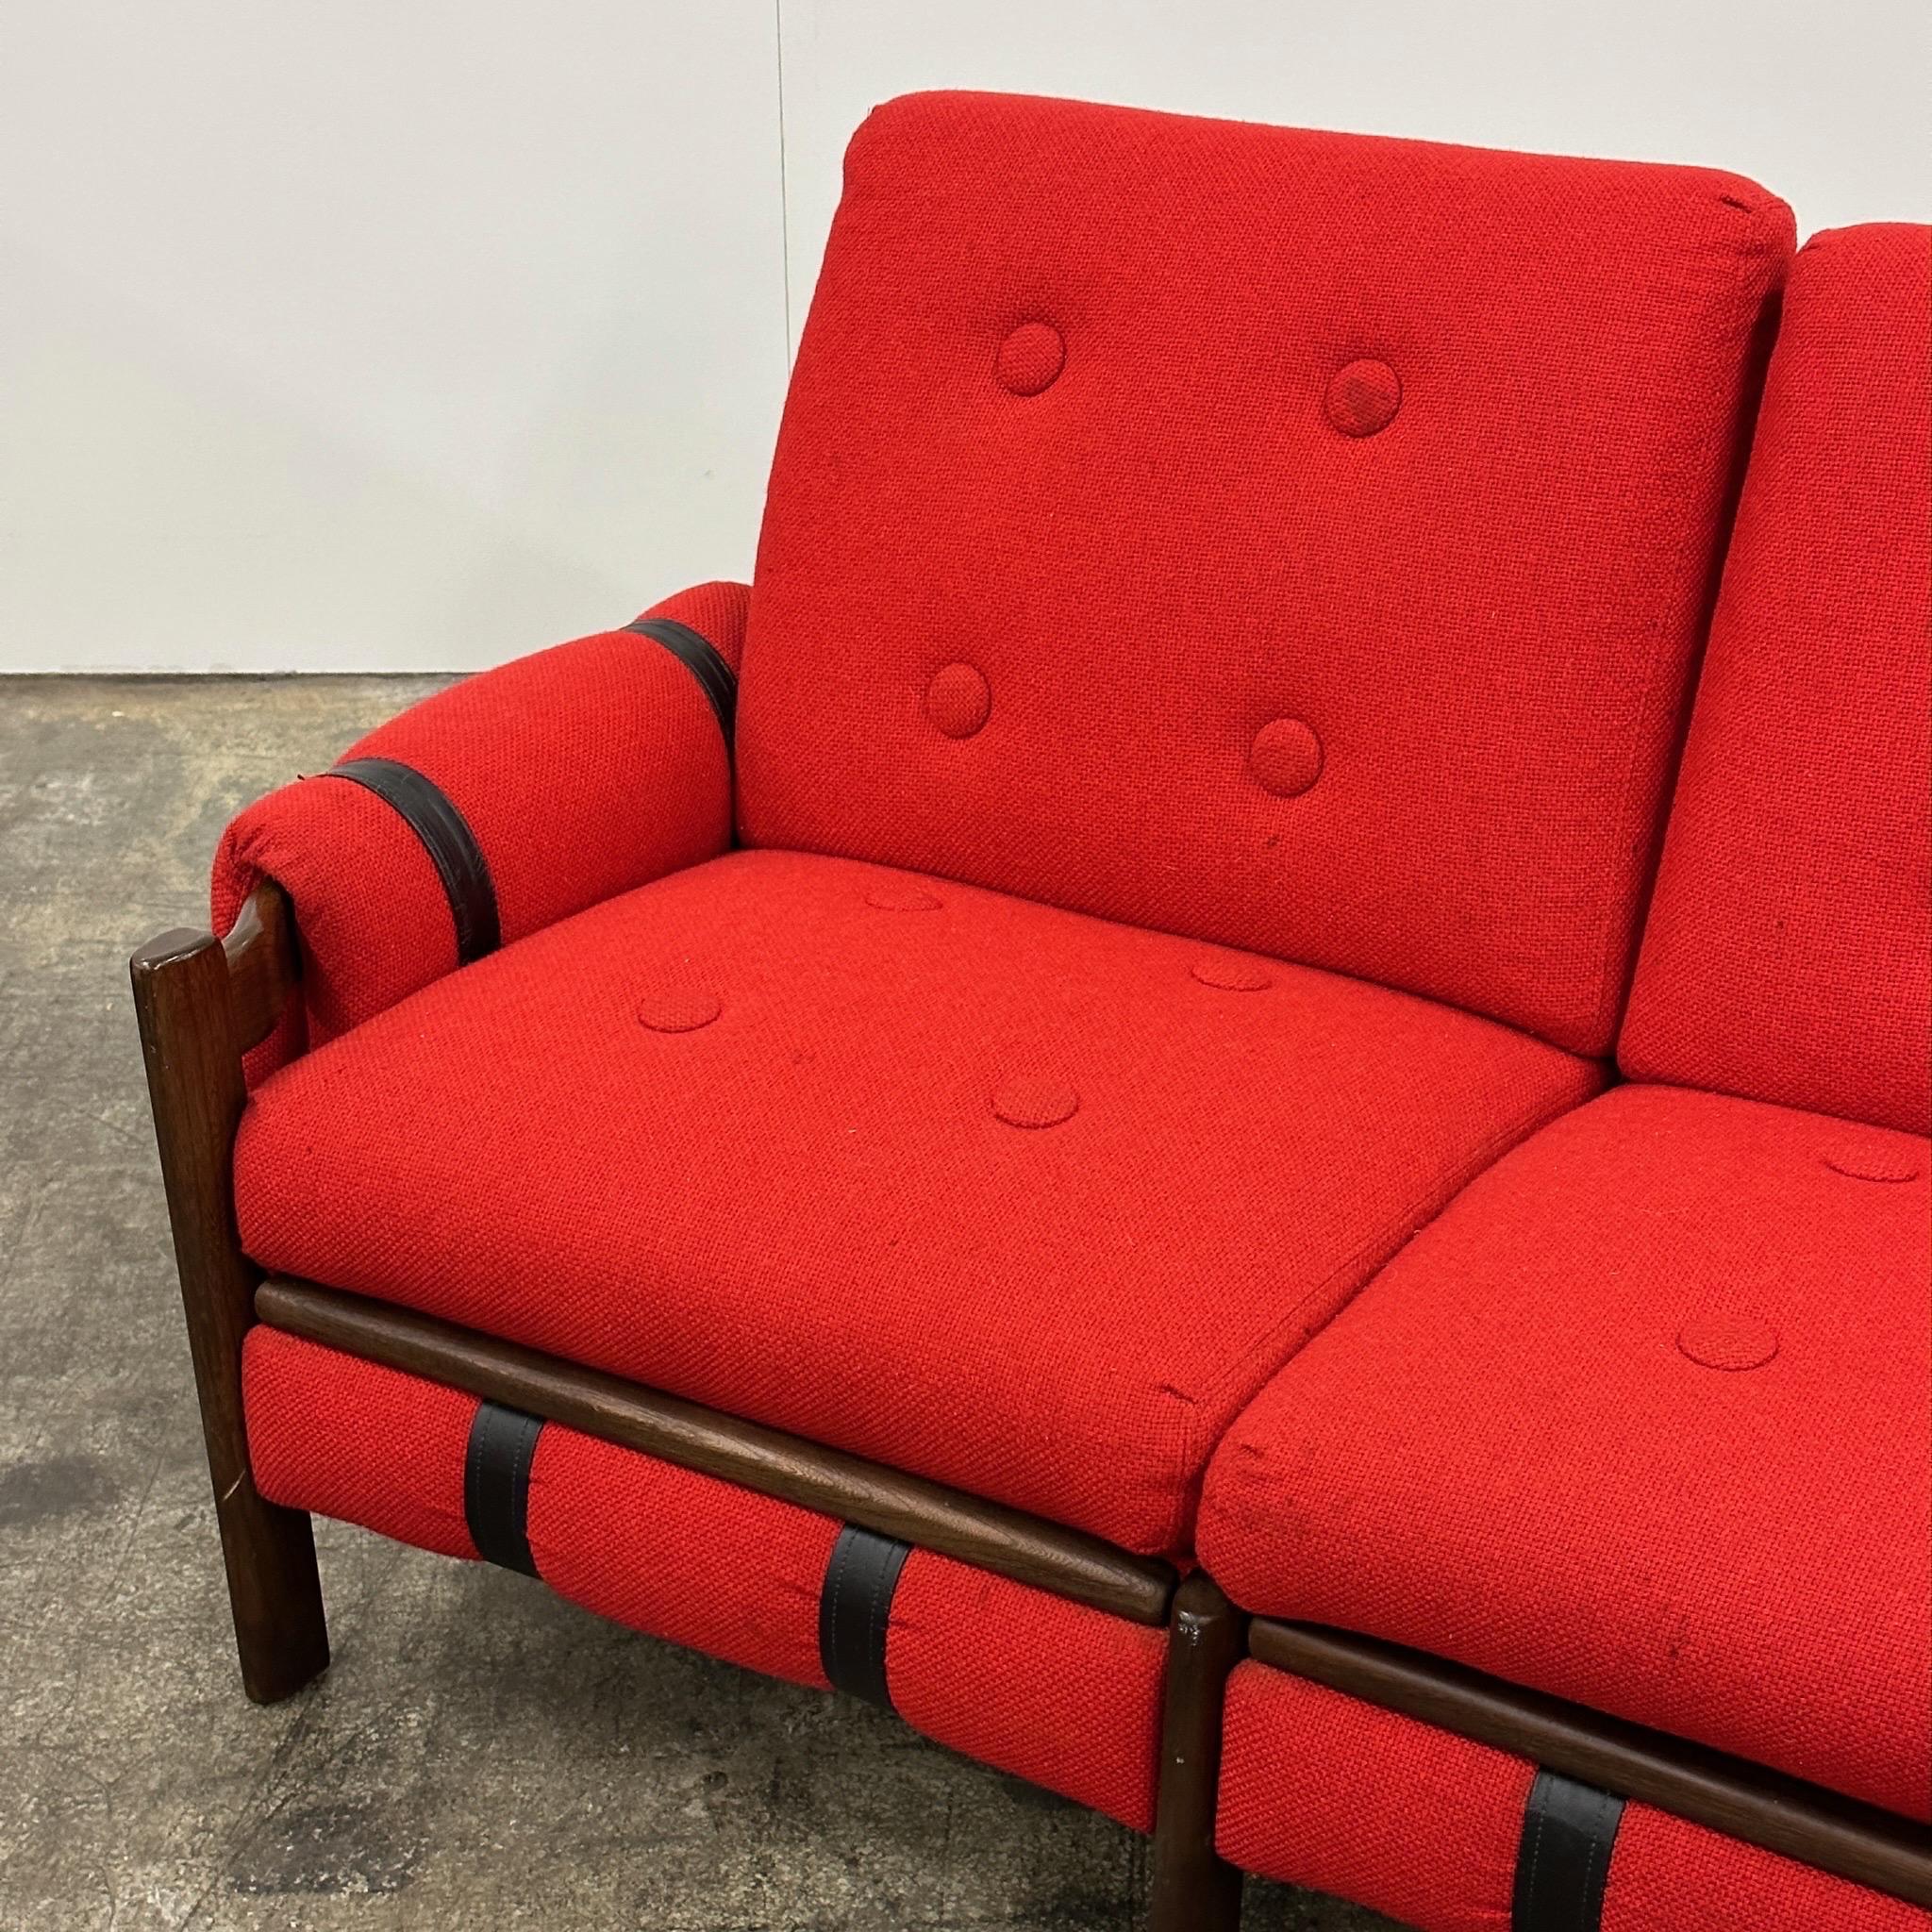 c. 1970s. Upholstered in red wool. Leather slings on arms are adjustable. Wood frame. 